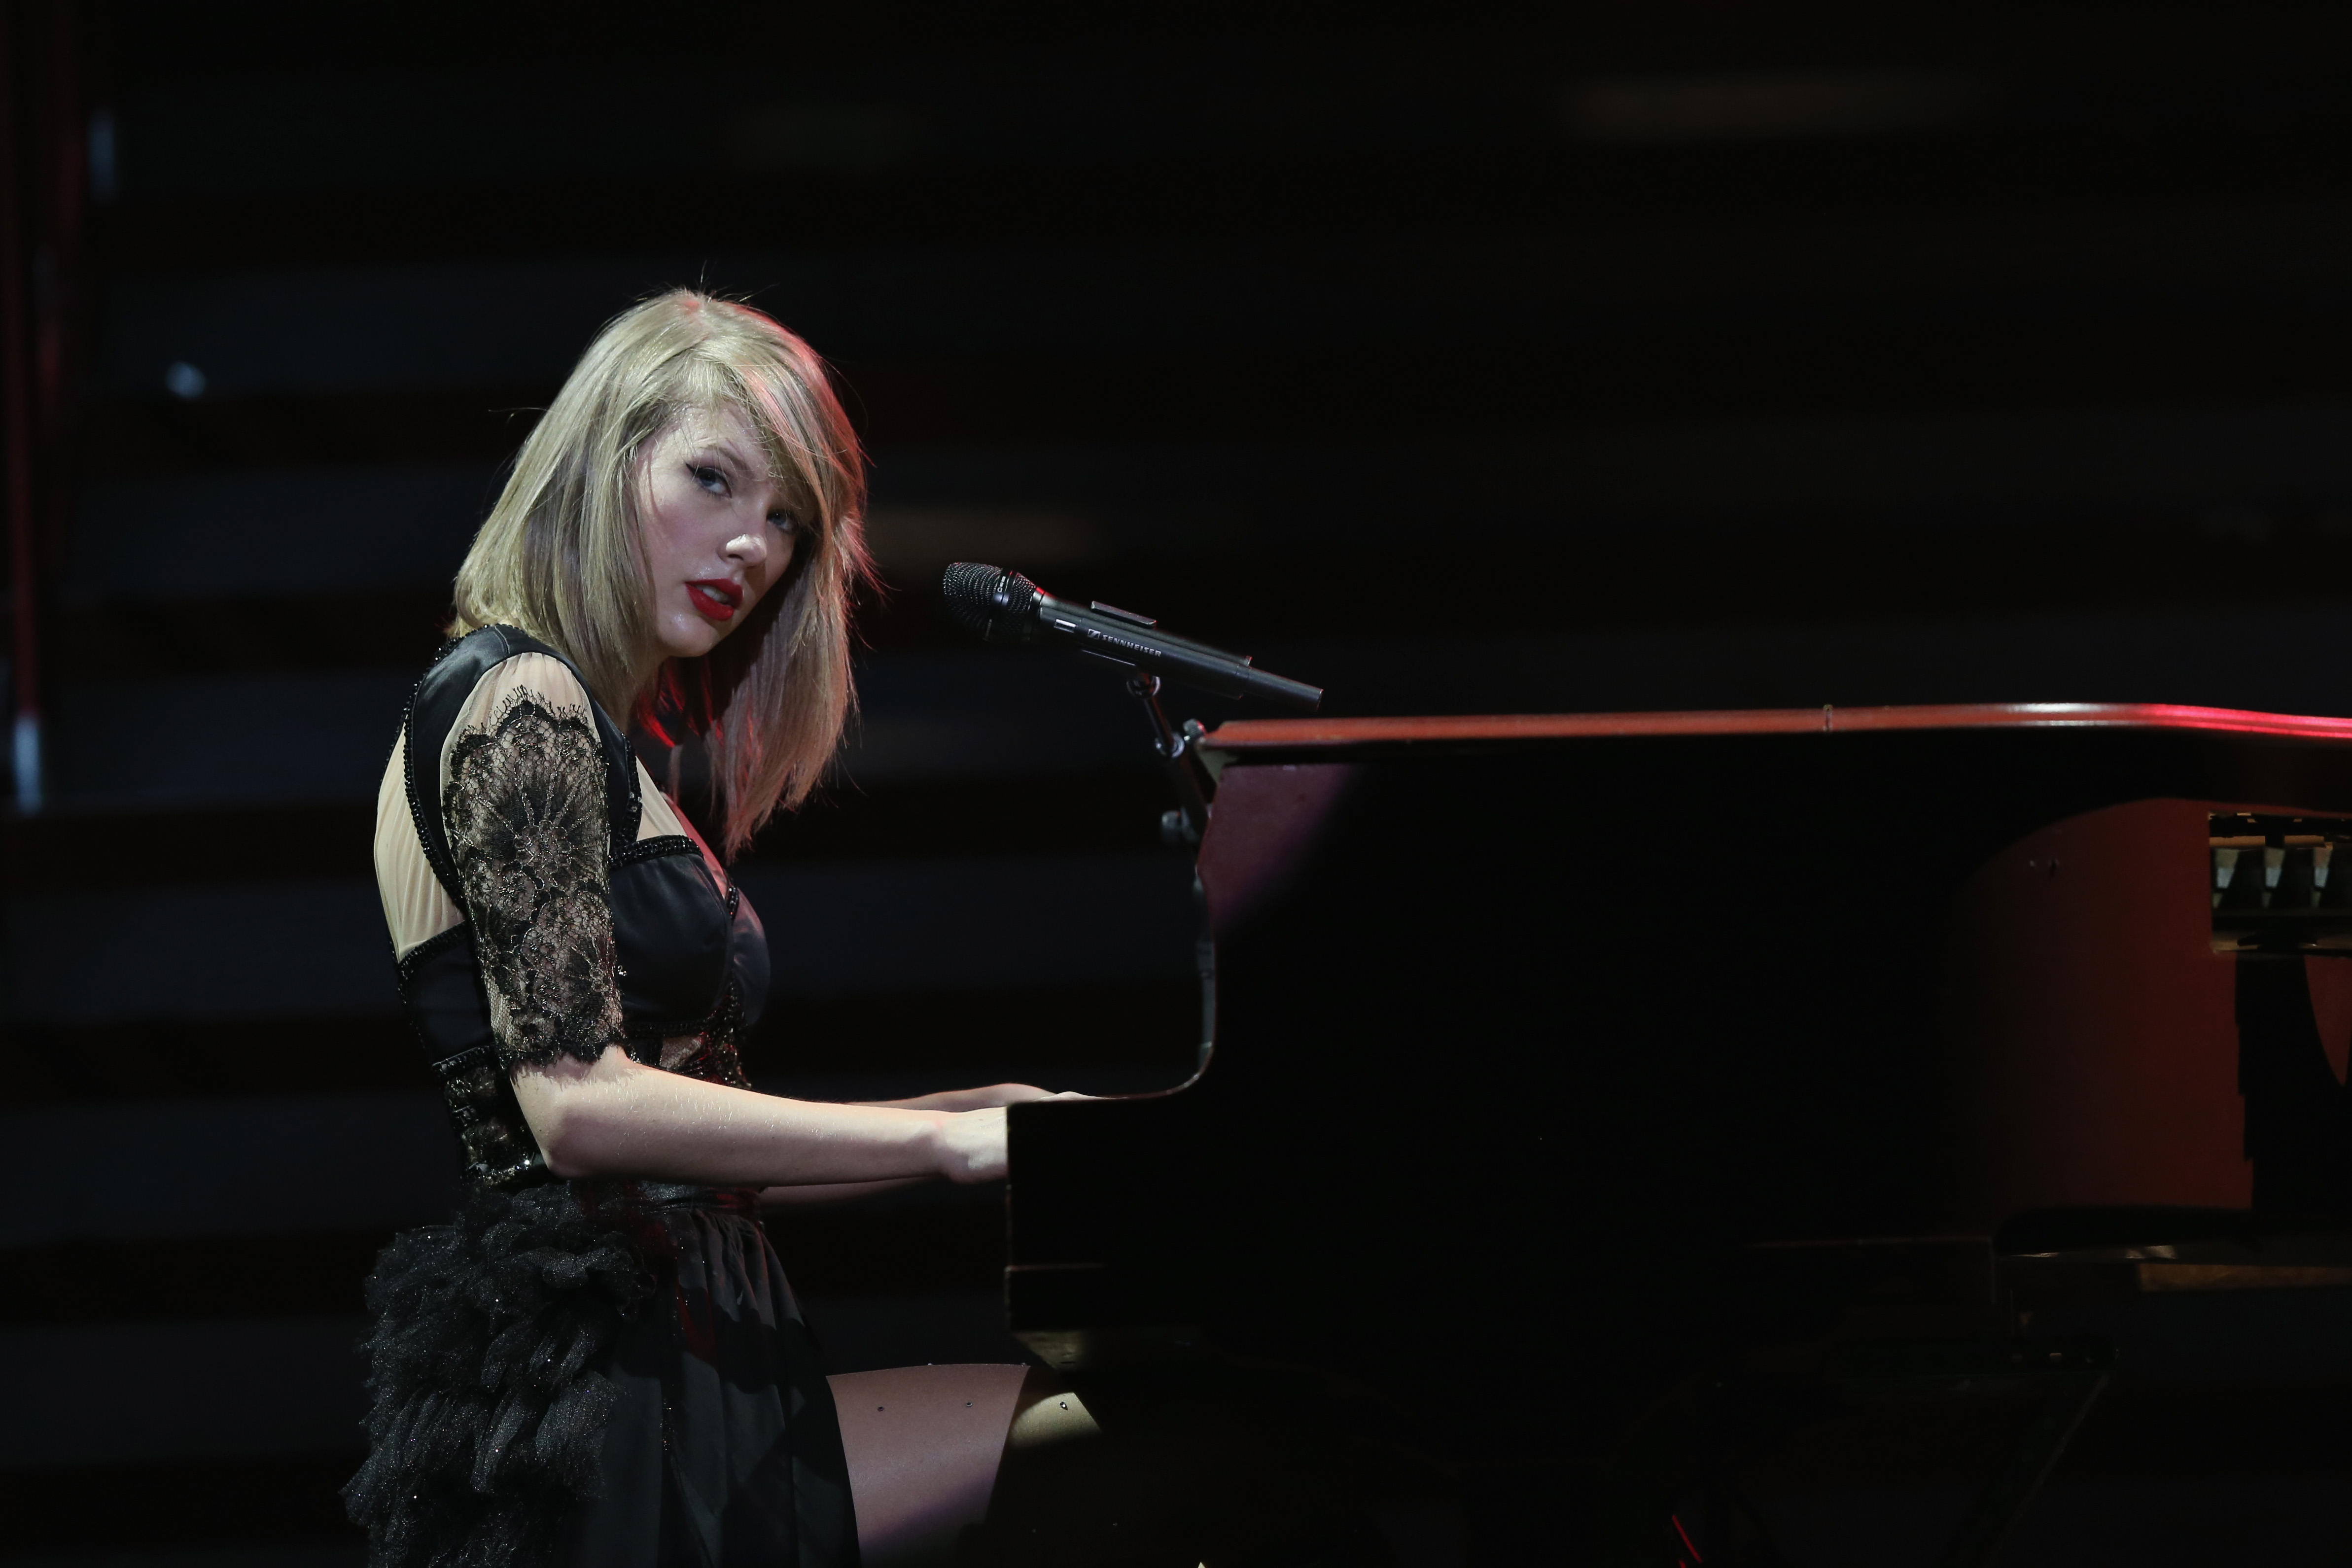 Free download wallpaper Music, Piano, Singer, Blonde, American, Taylor Swift, Lipstick on your PC desktop